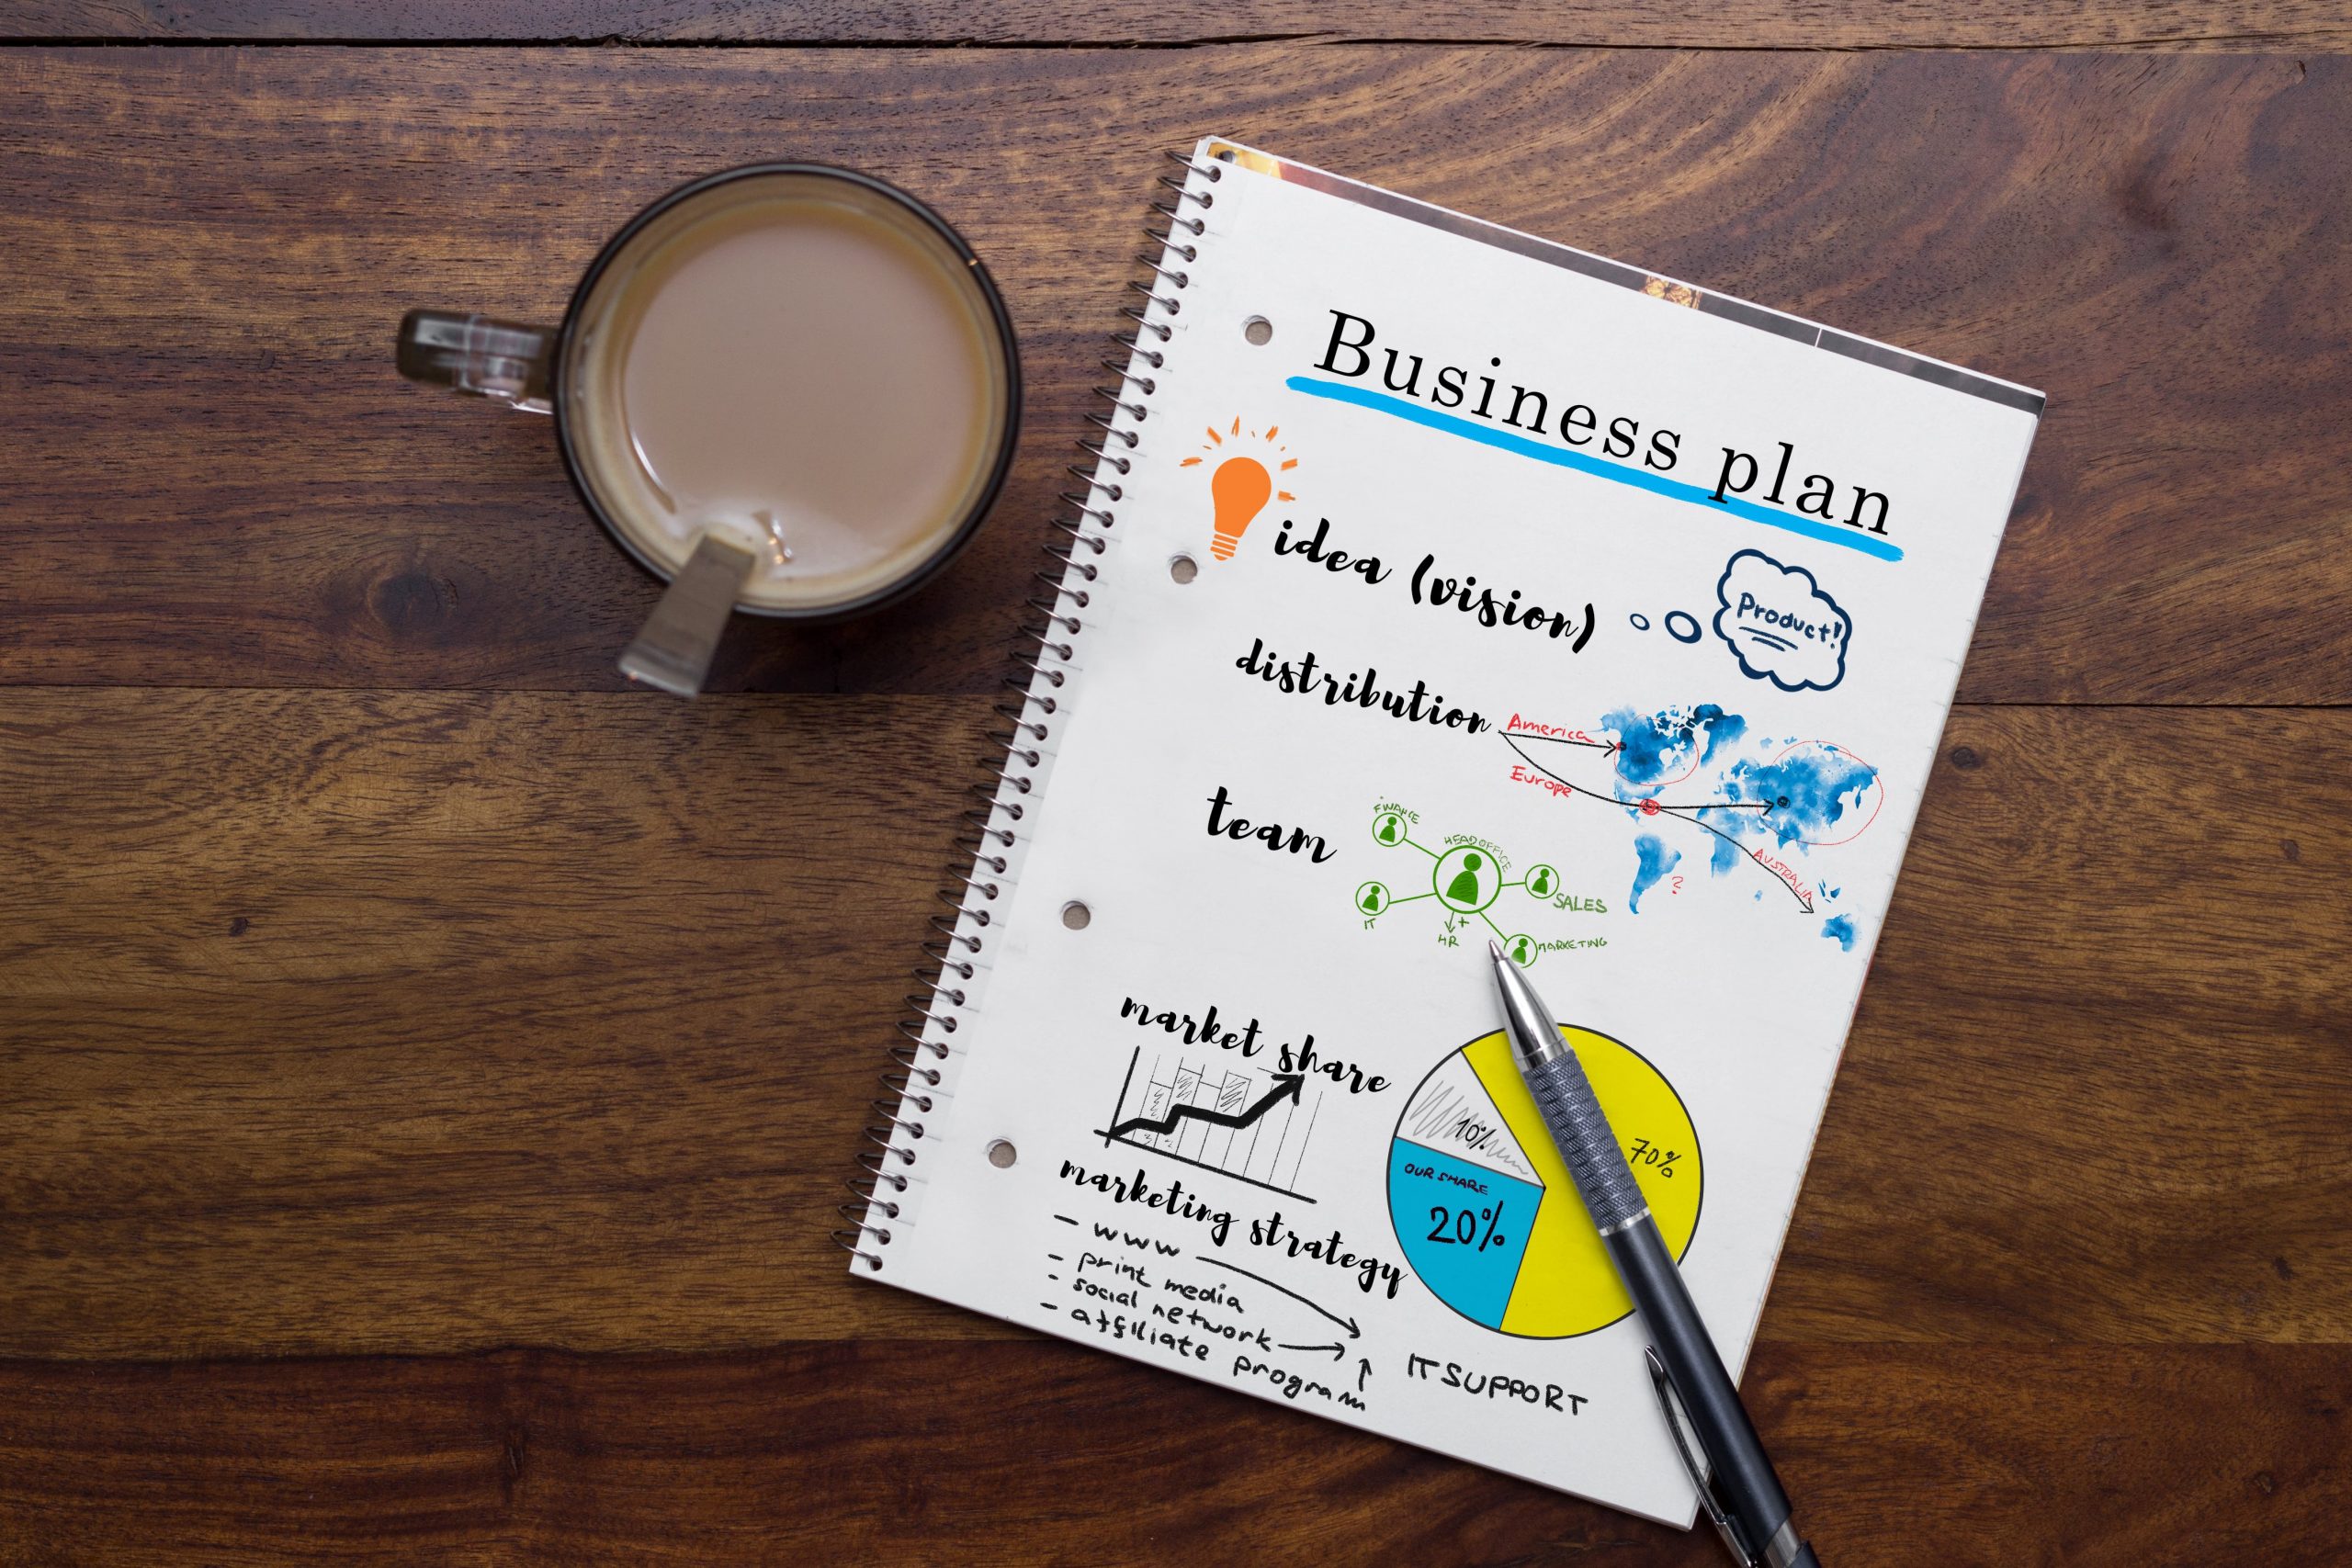 Business plan consulting